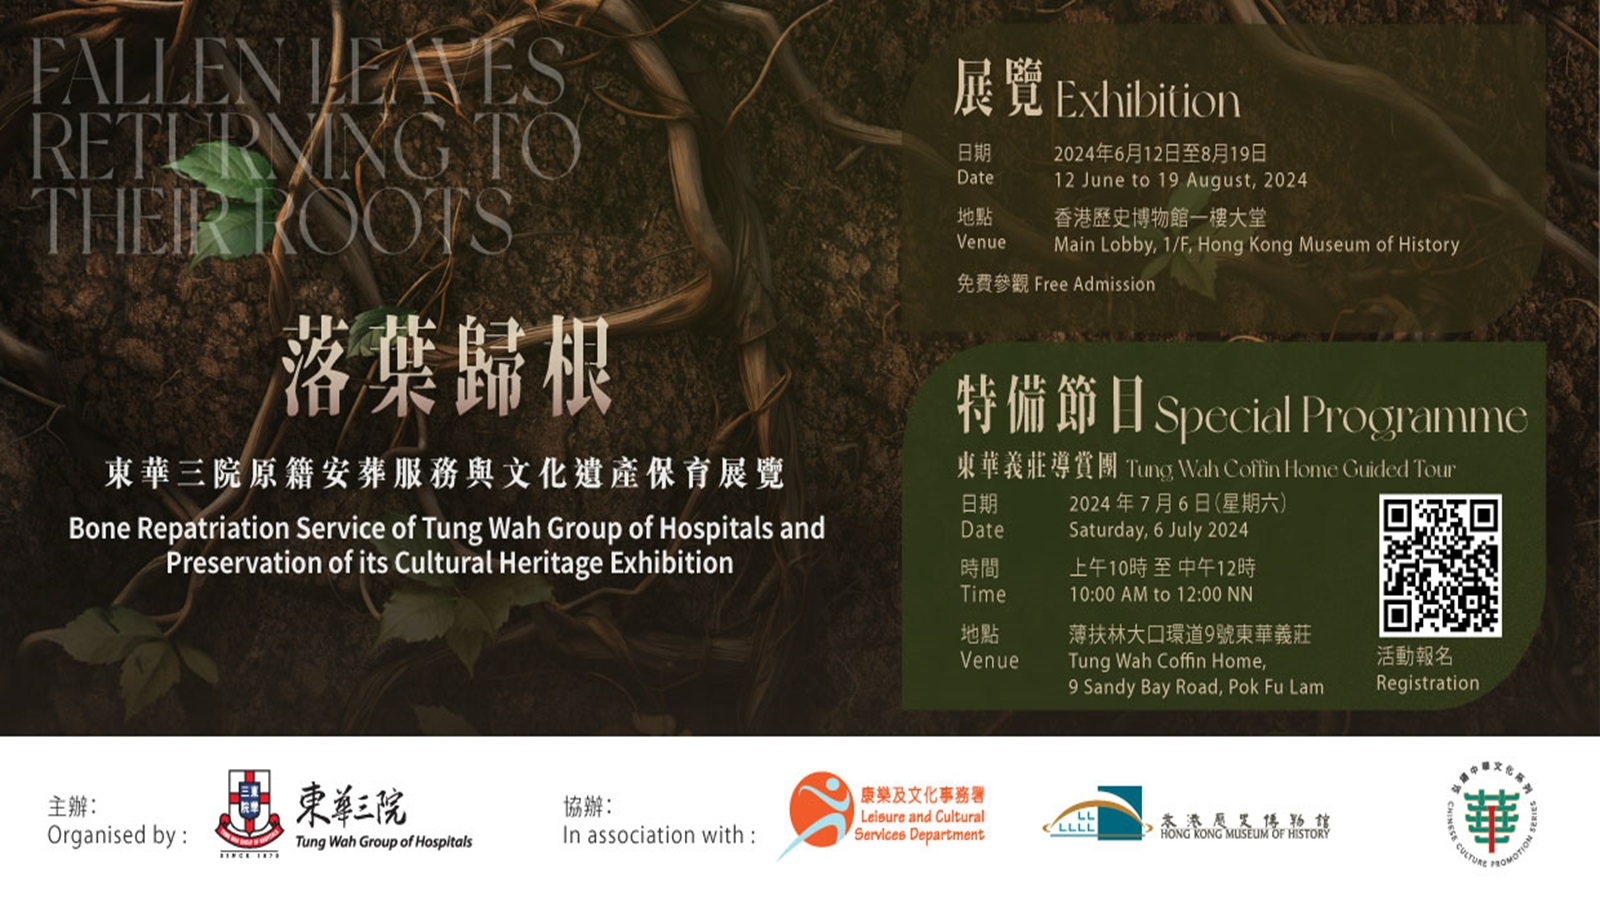 "Fallen Leaves Returning to their Roots: Bone Repatriation Service of Tung Wah Group of Hospitals and Preservation of its Cultural Heritage" Special Programme: Tung Wah Coffin Home Guided Tour【Registration will start at 9a.m. on Monday, 24 June 2024】